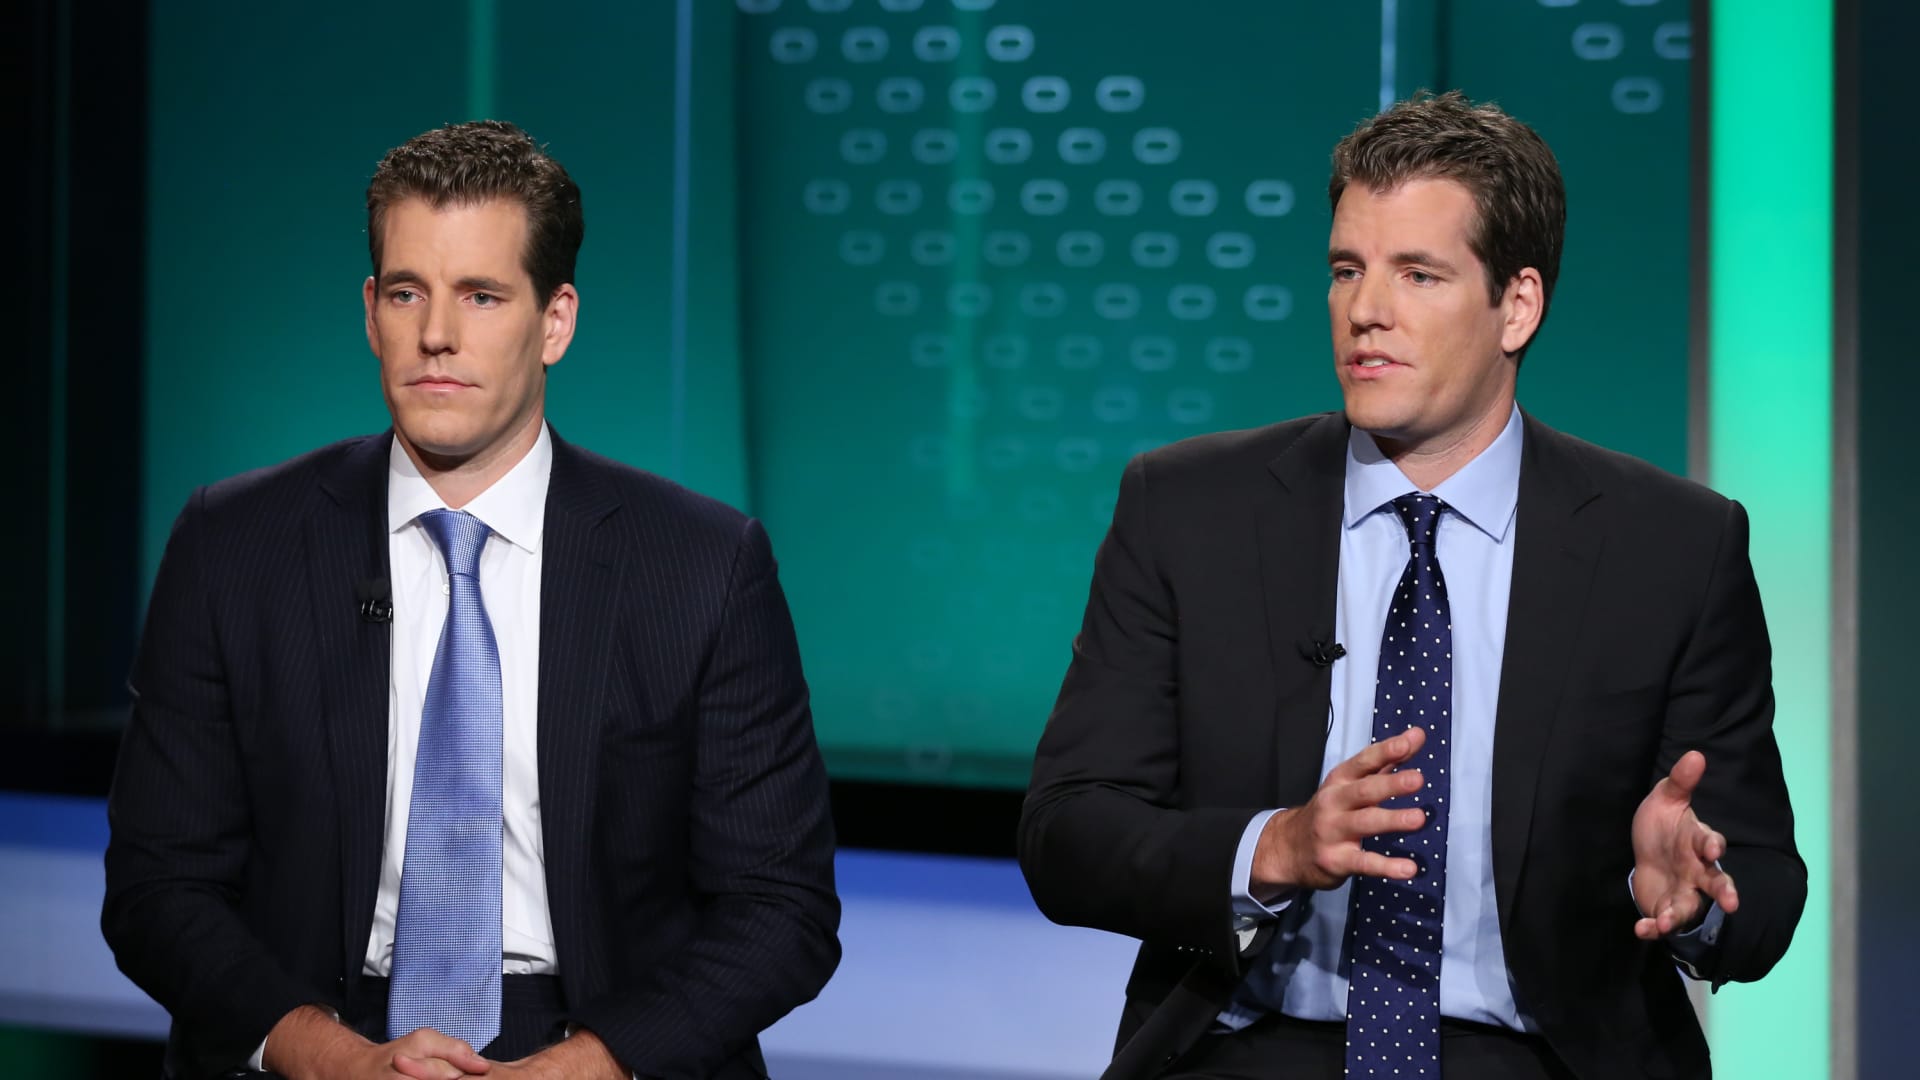 Winklevoss twins’ crypto exchange Gemini to contribute $100 million to Genesis bankruptcy recovery